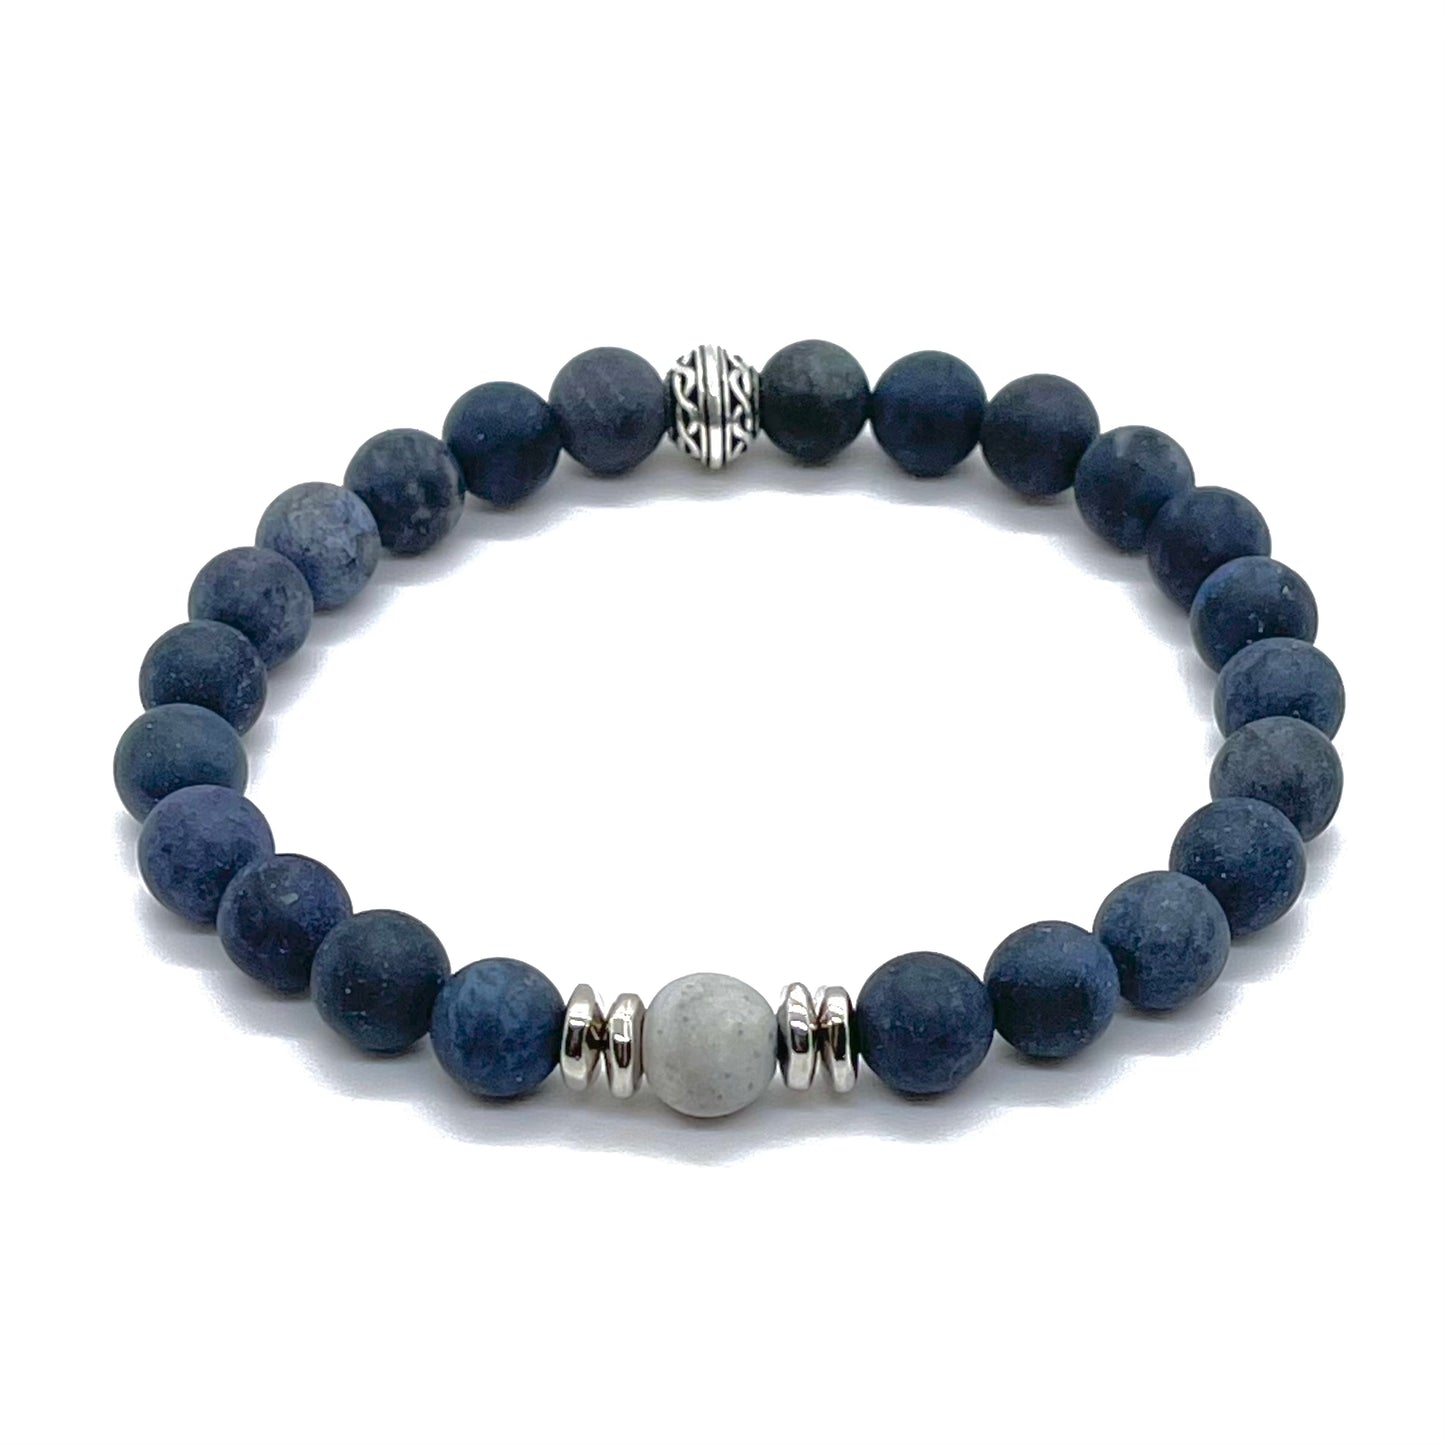 Mens bead bracelet with blue dumortierite and silver beads on stretch cord.